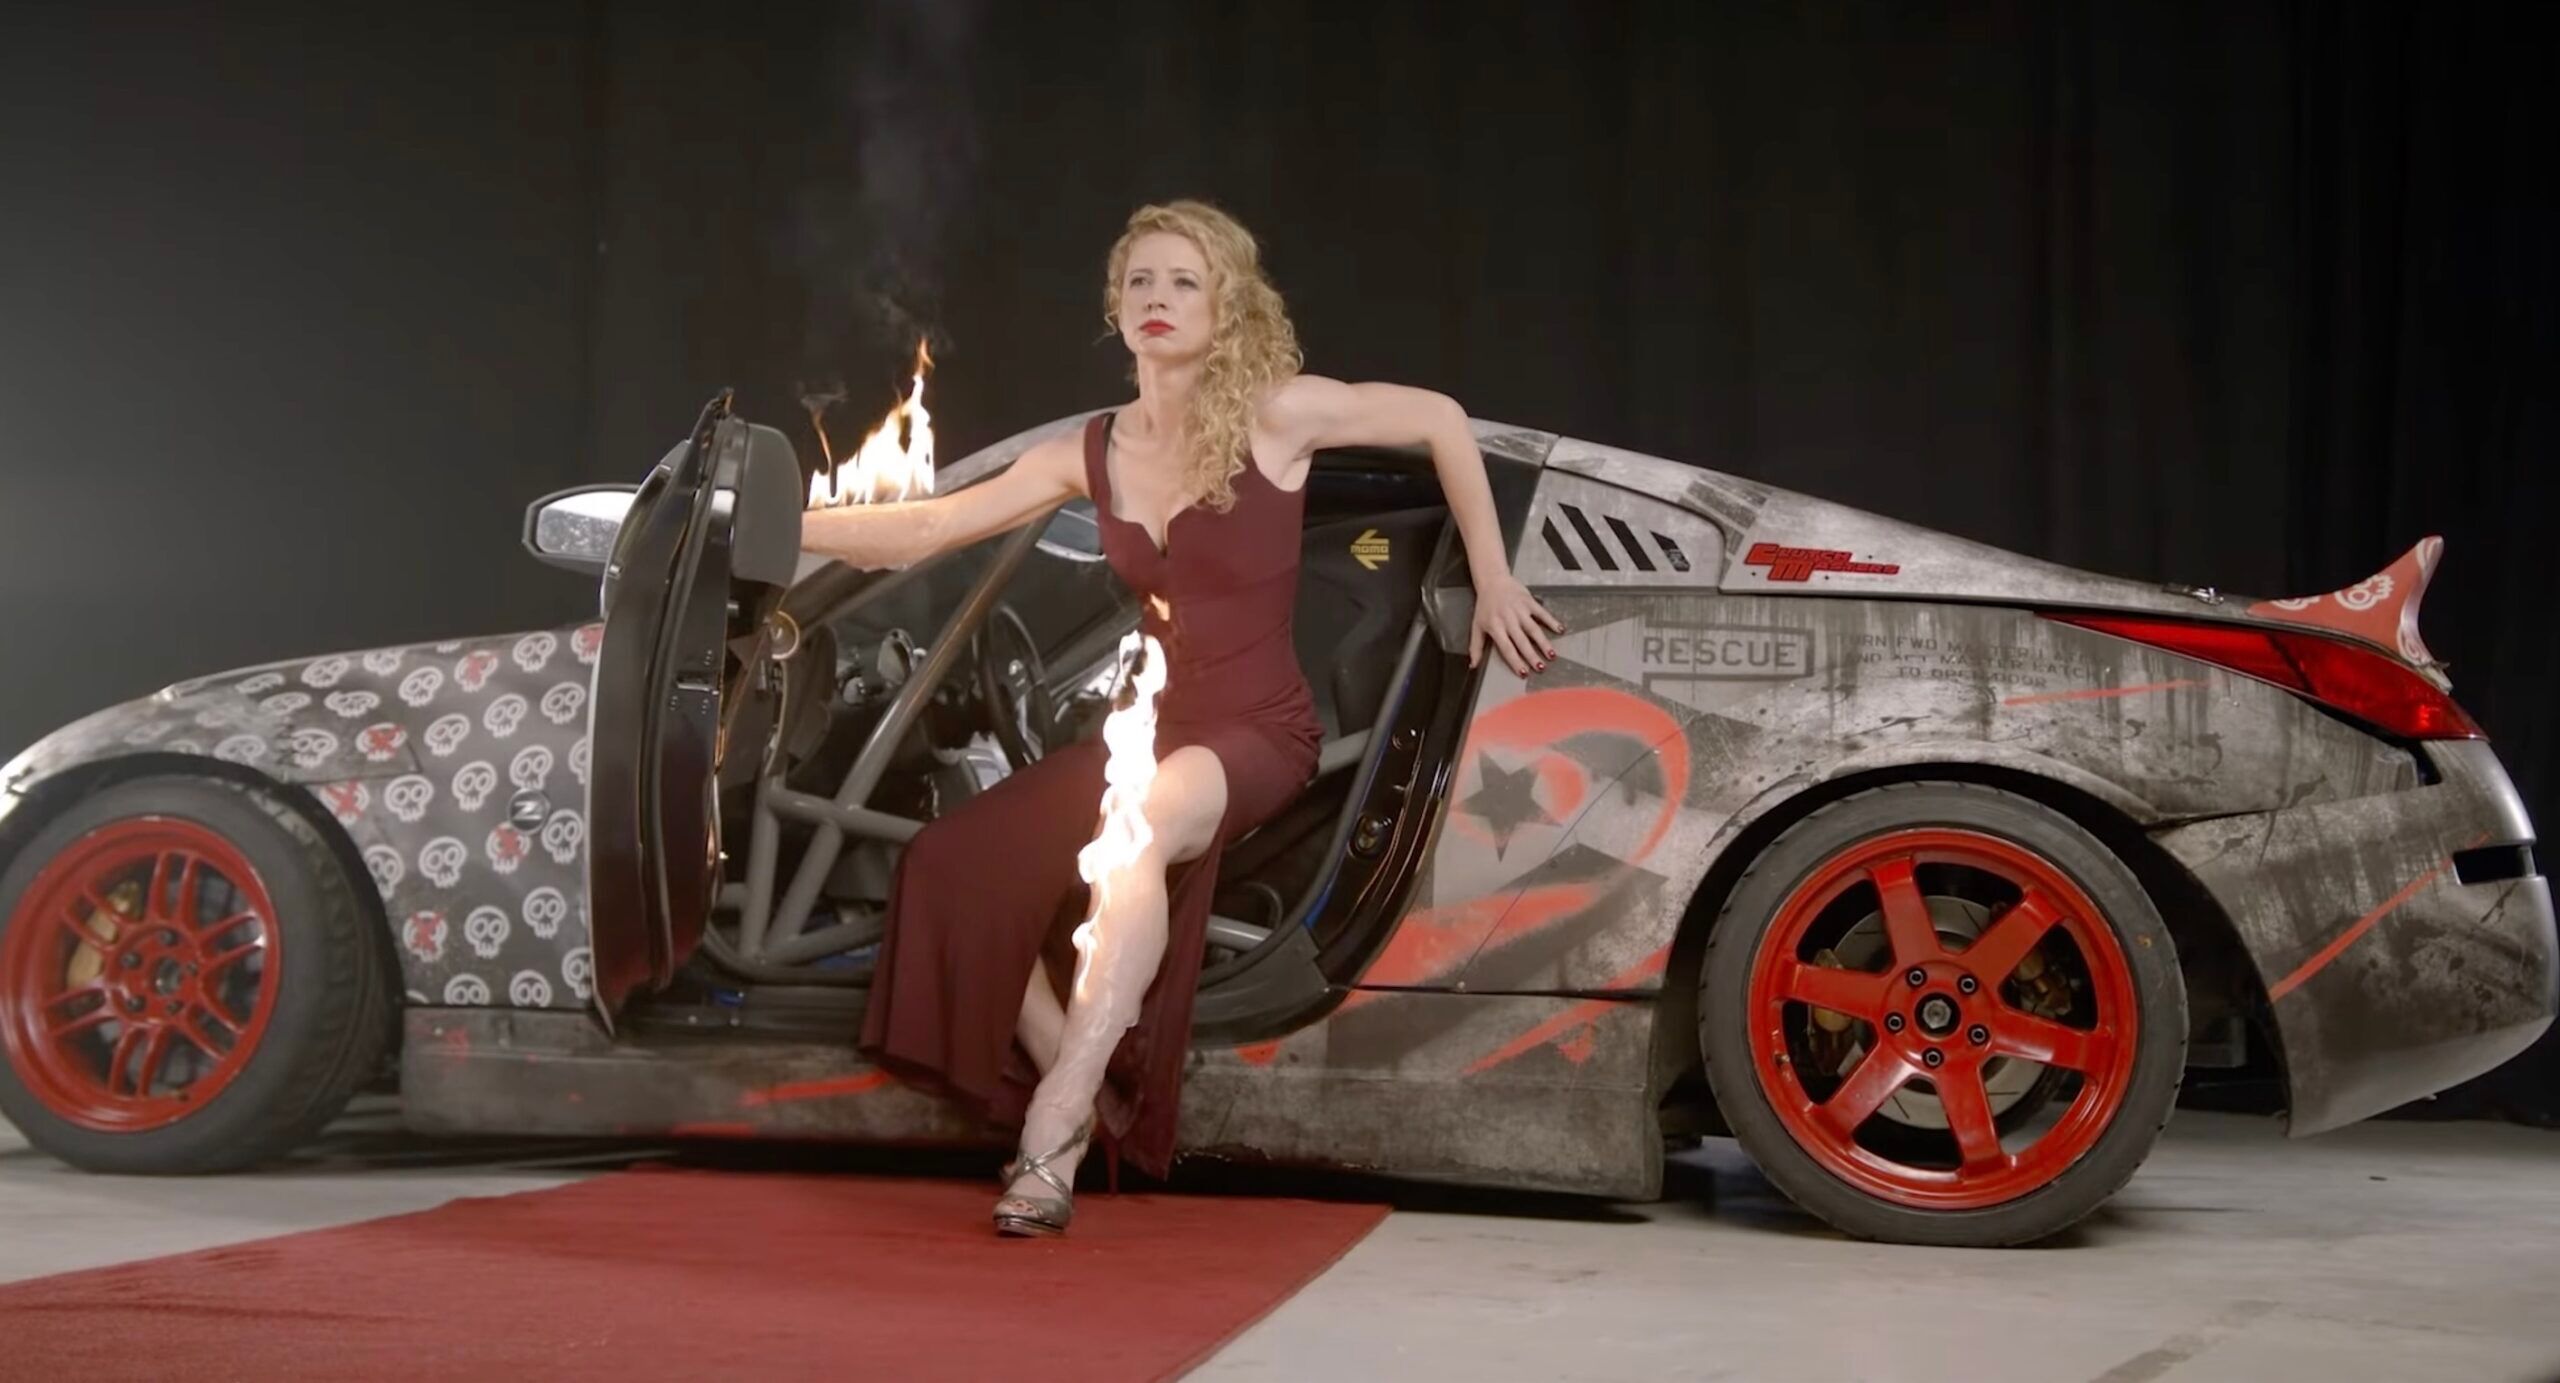 Queer stunt driver Zandara Kennedy poses with her arm and leg on fire in front of her drift car